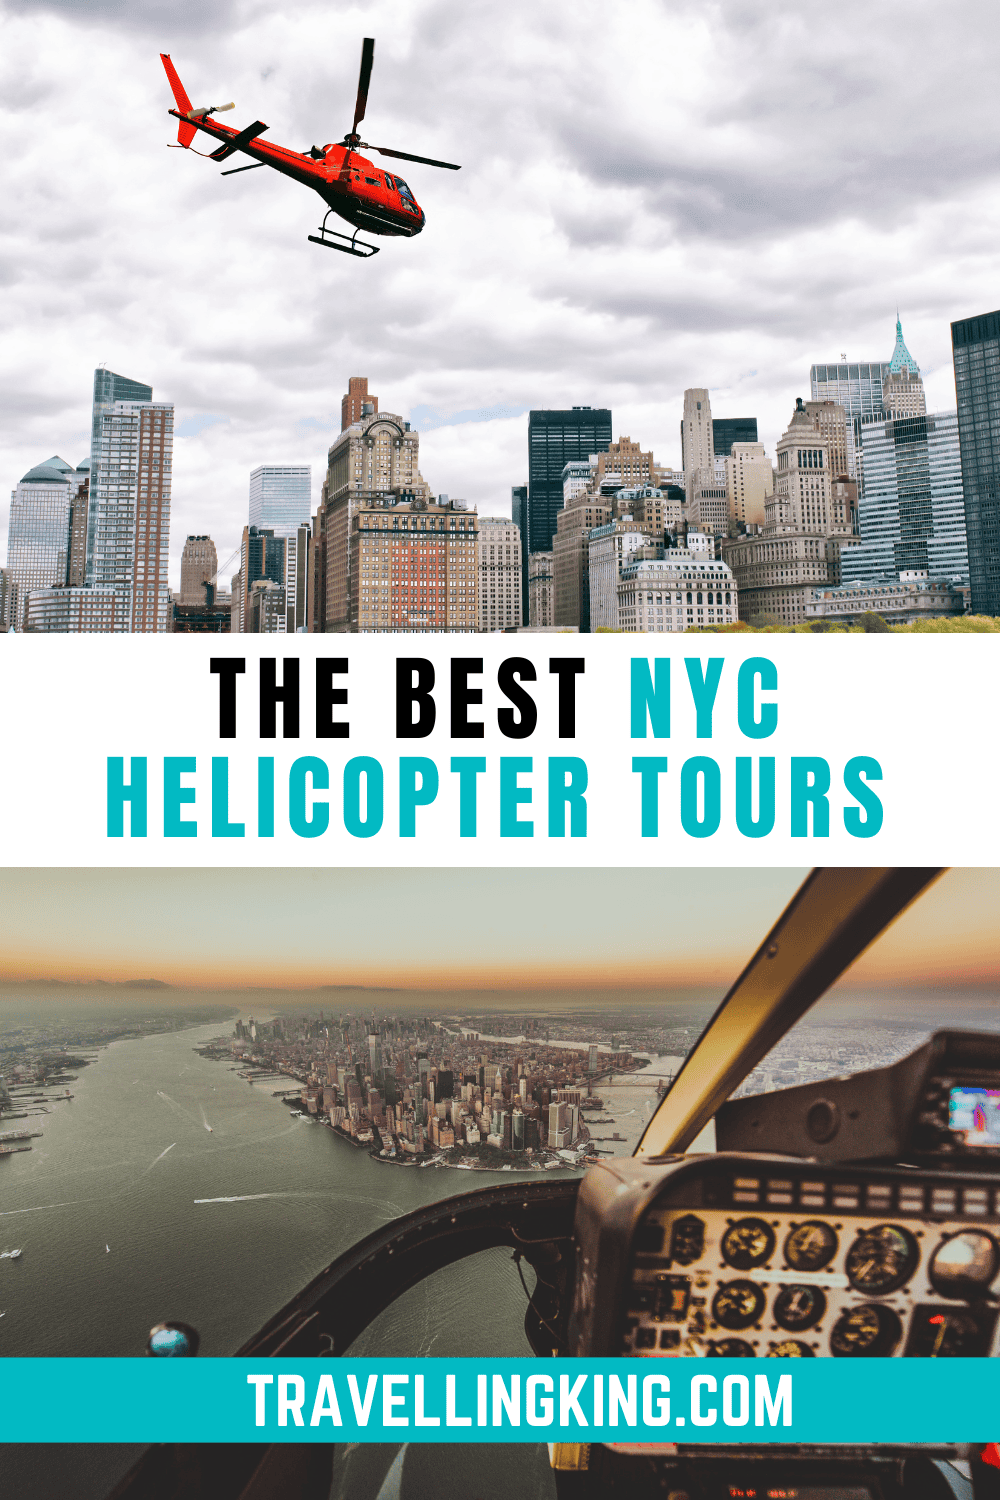 8 of the Best NYC Helicopter Tours